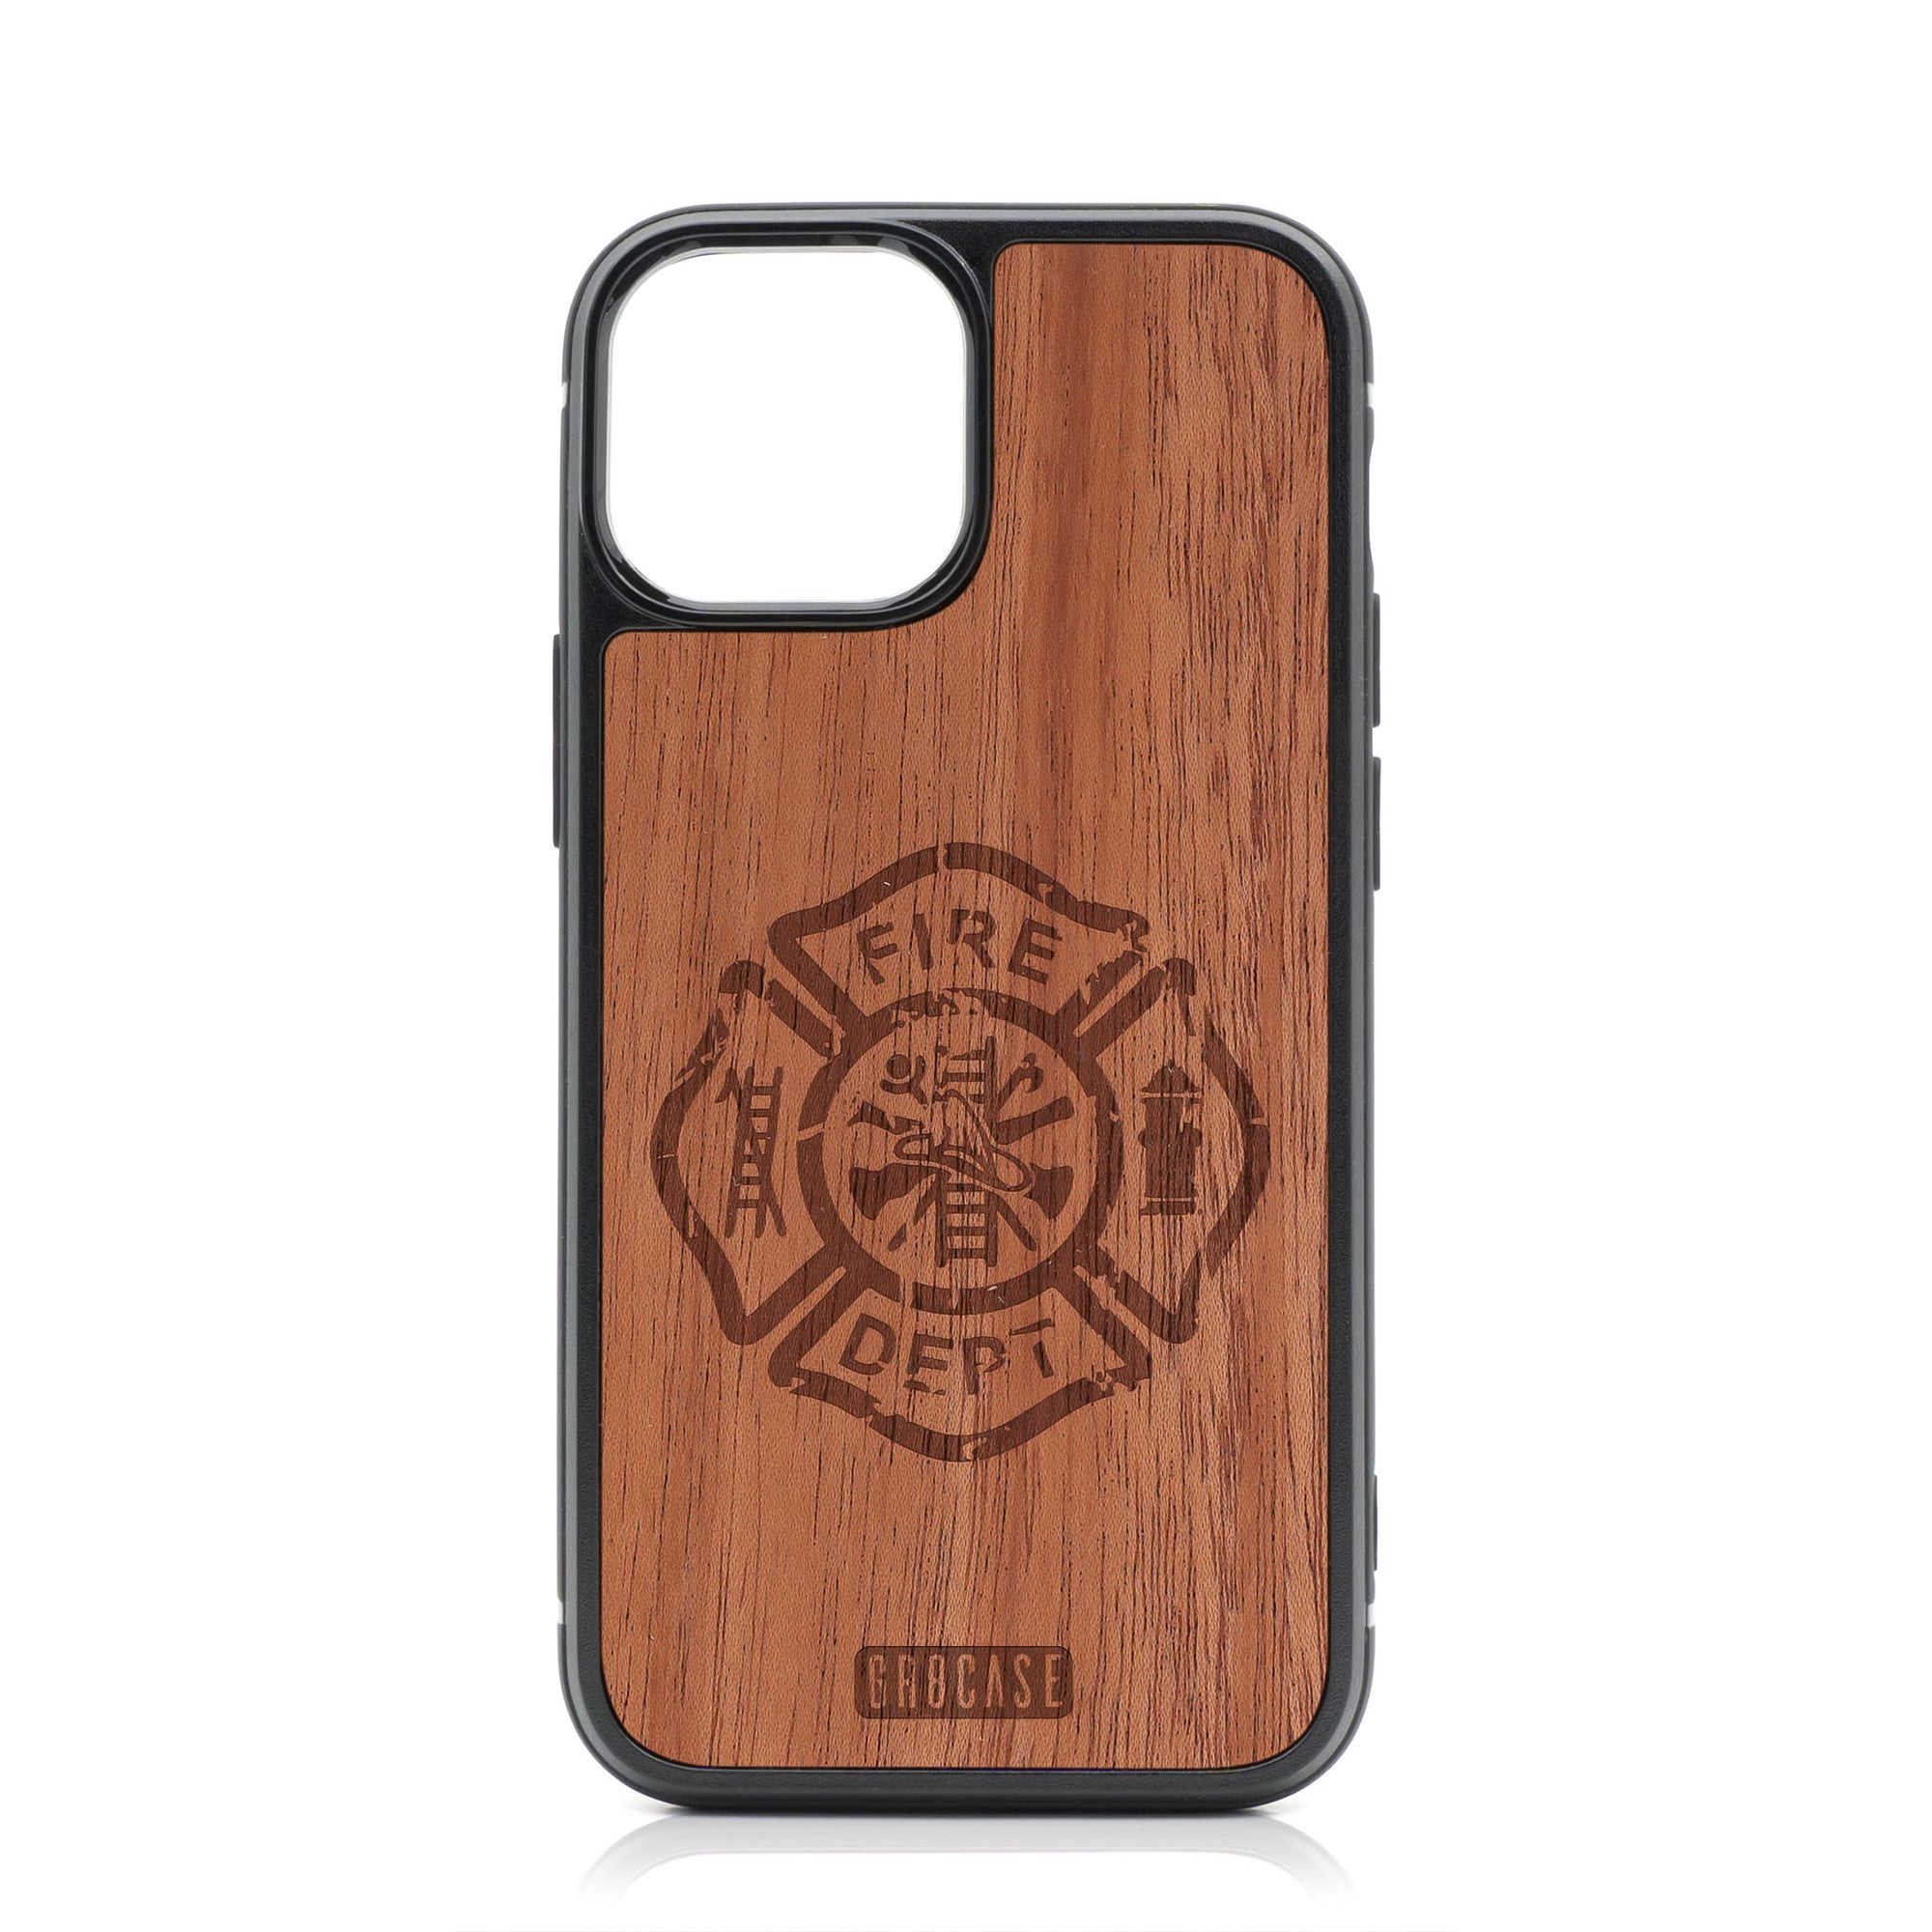 Fire Department Design Wood Case For iPhone 13 Mini